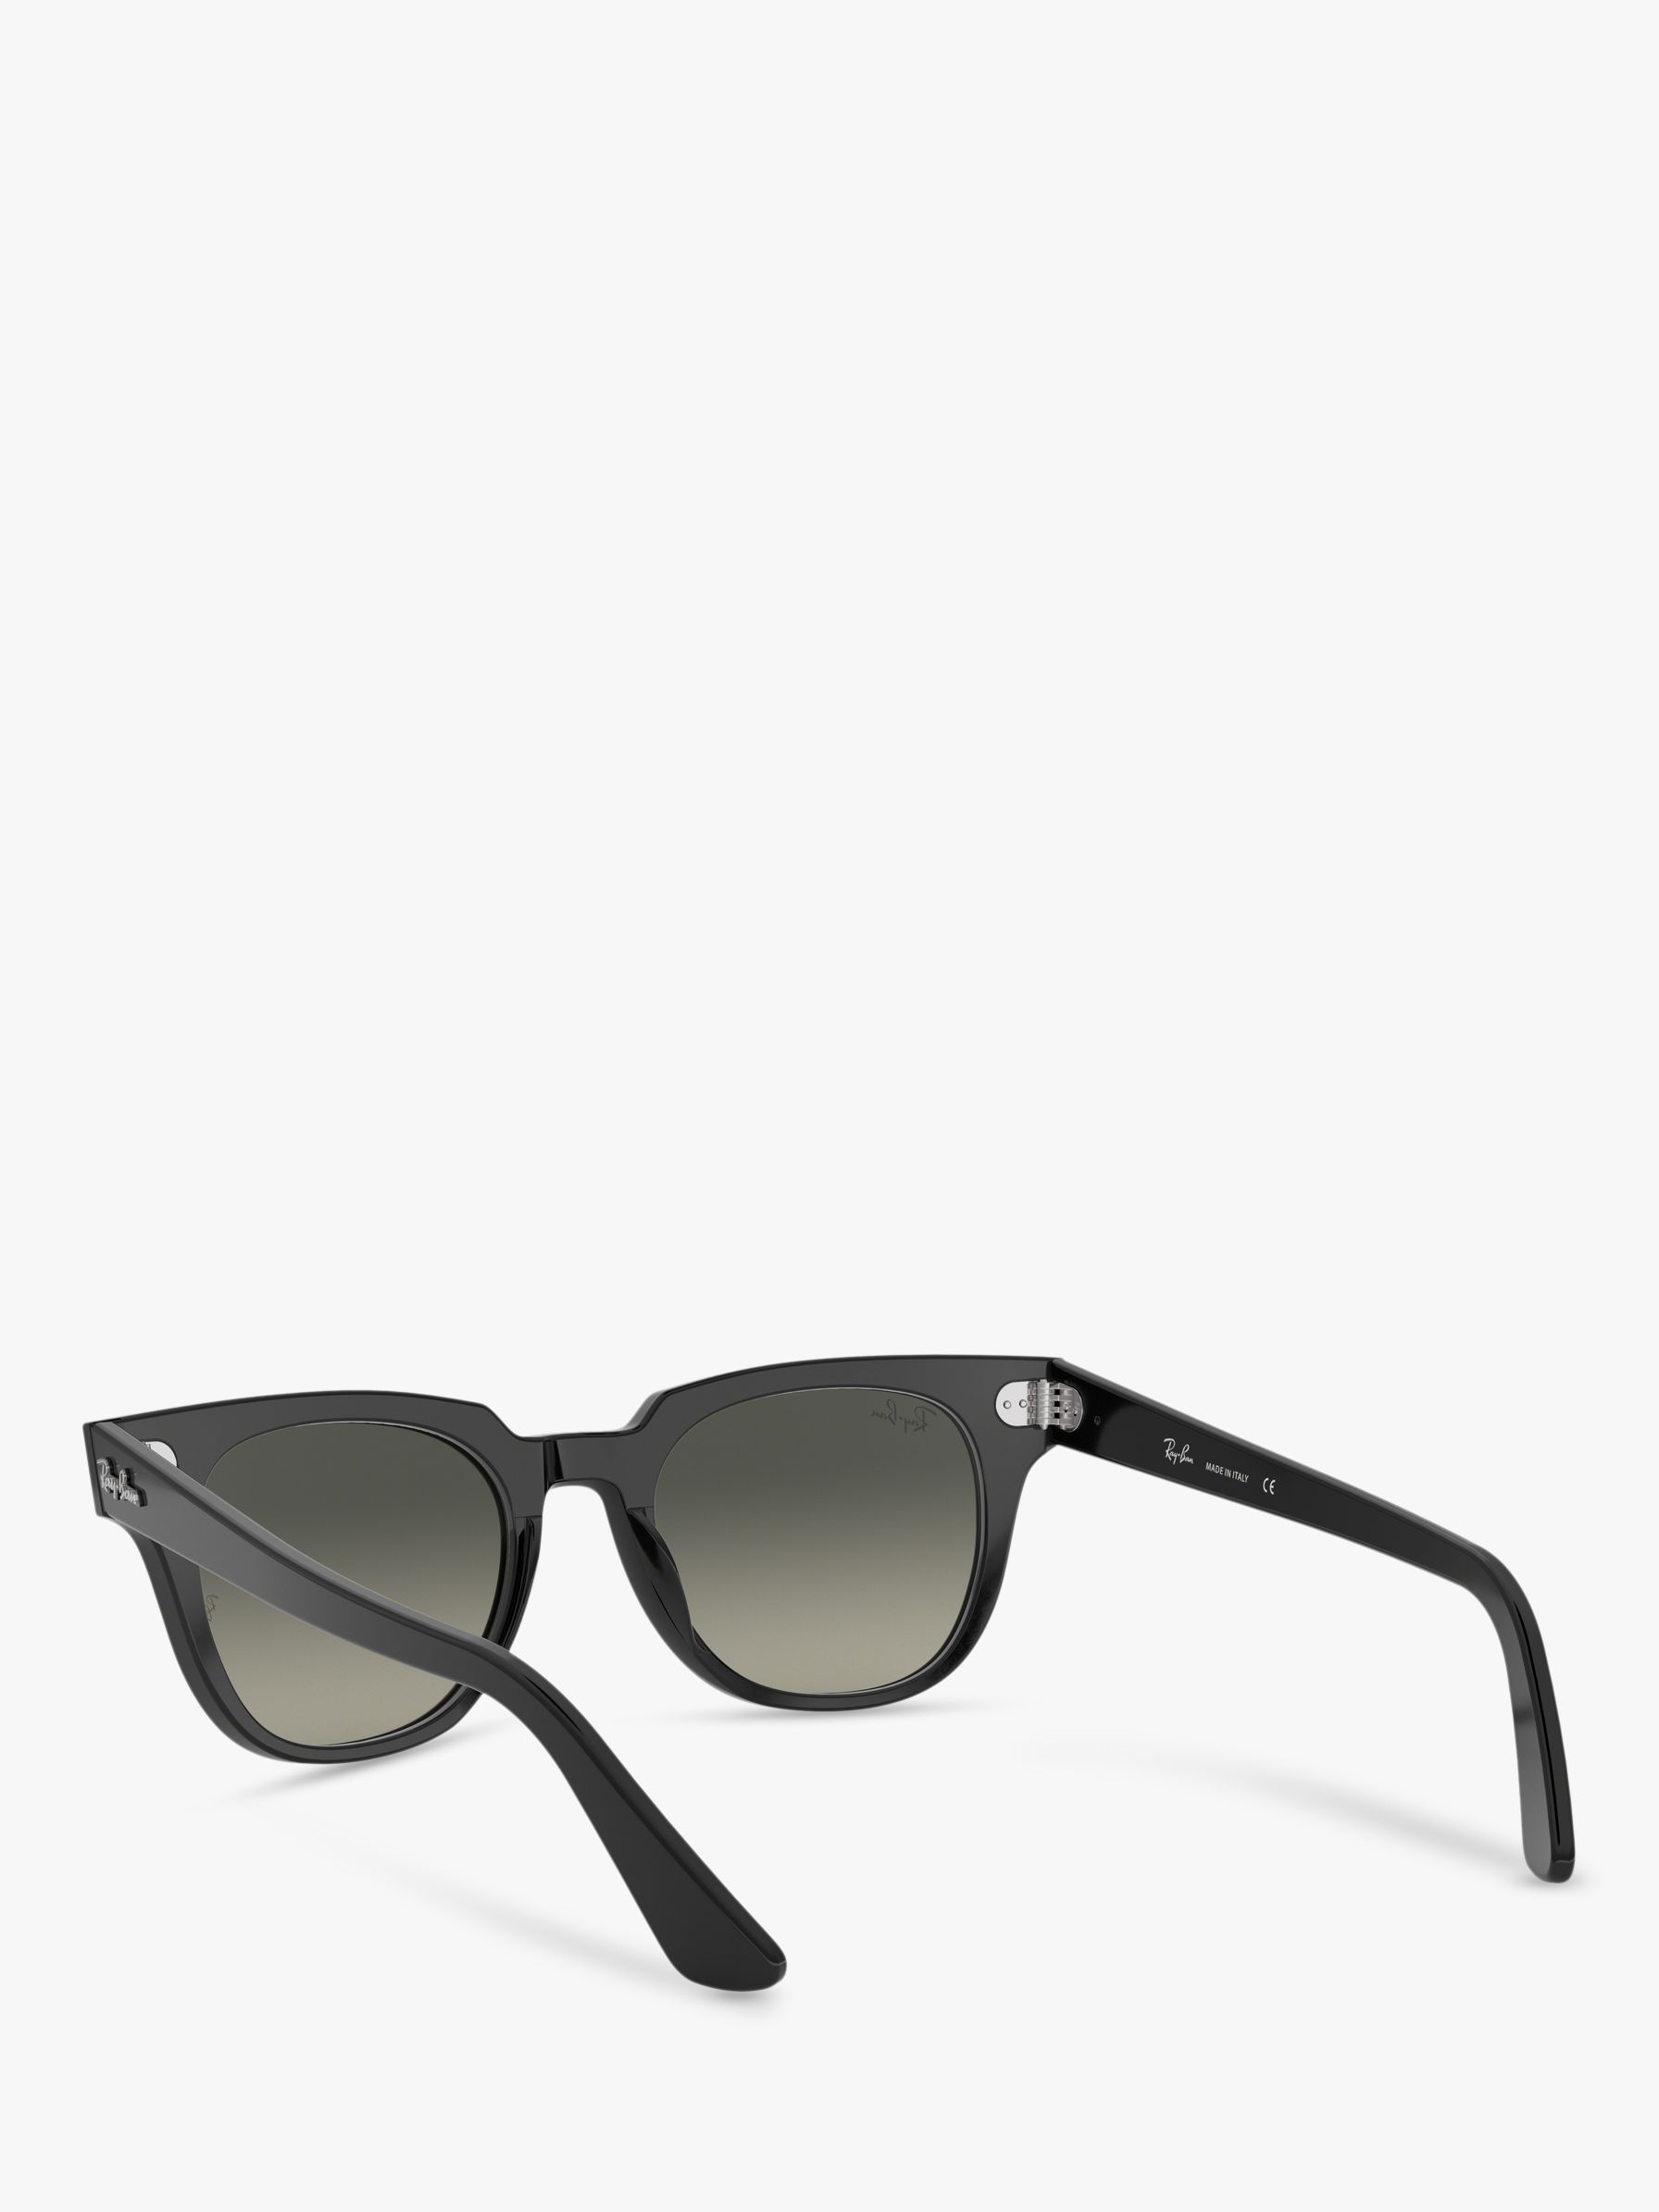 Ray Ban Rb2168 Unisex Square Sunglasses Blackgrey Gradient At John Lewis And Partners 5955